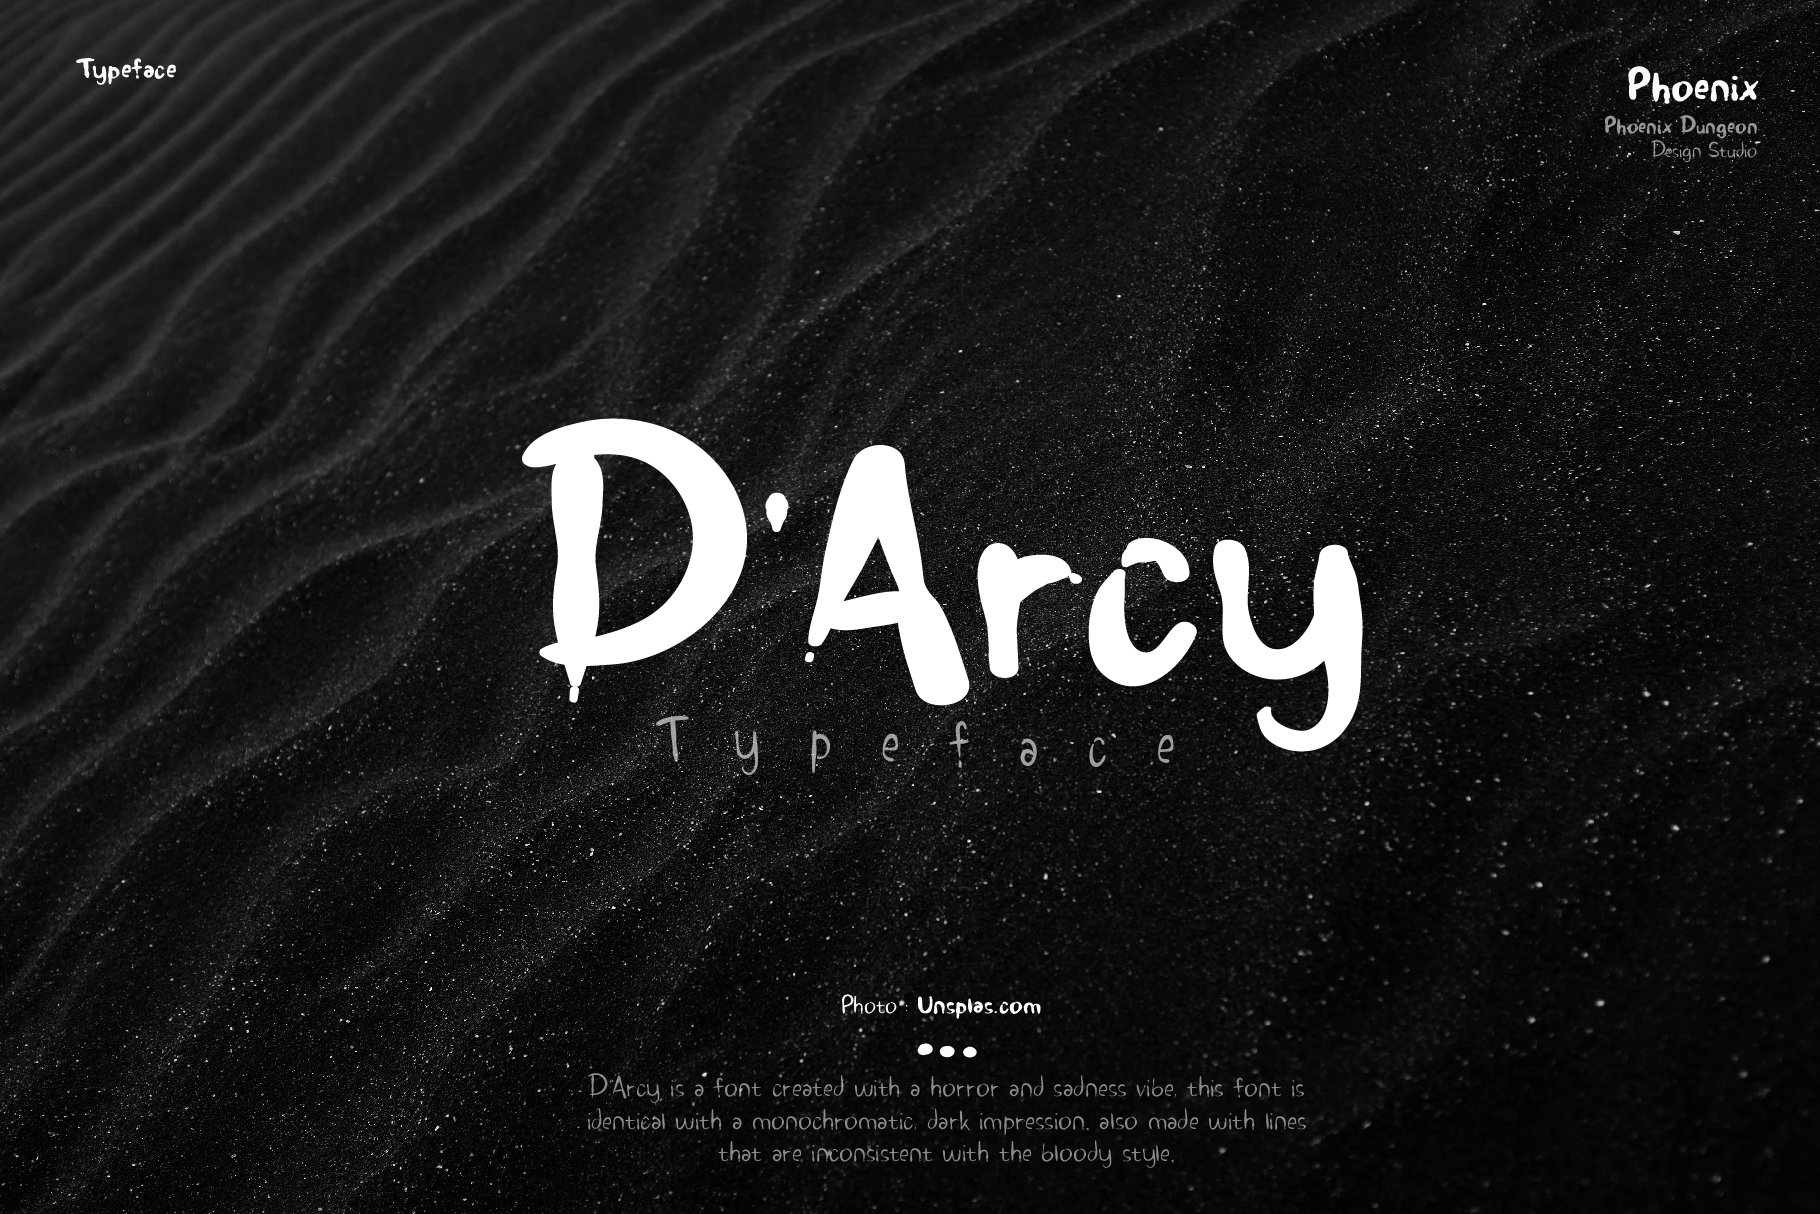 D'arcy Typeface cover image.